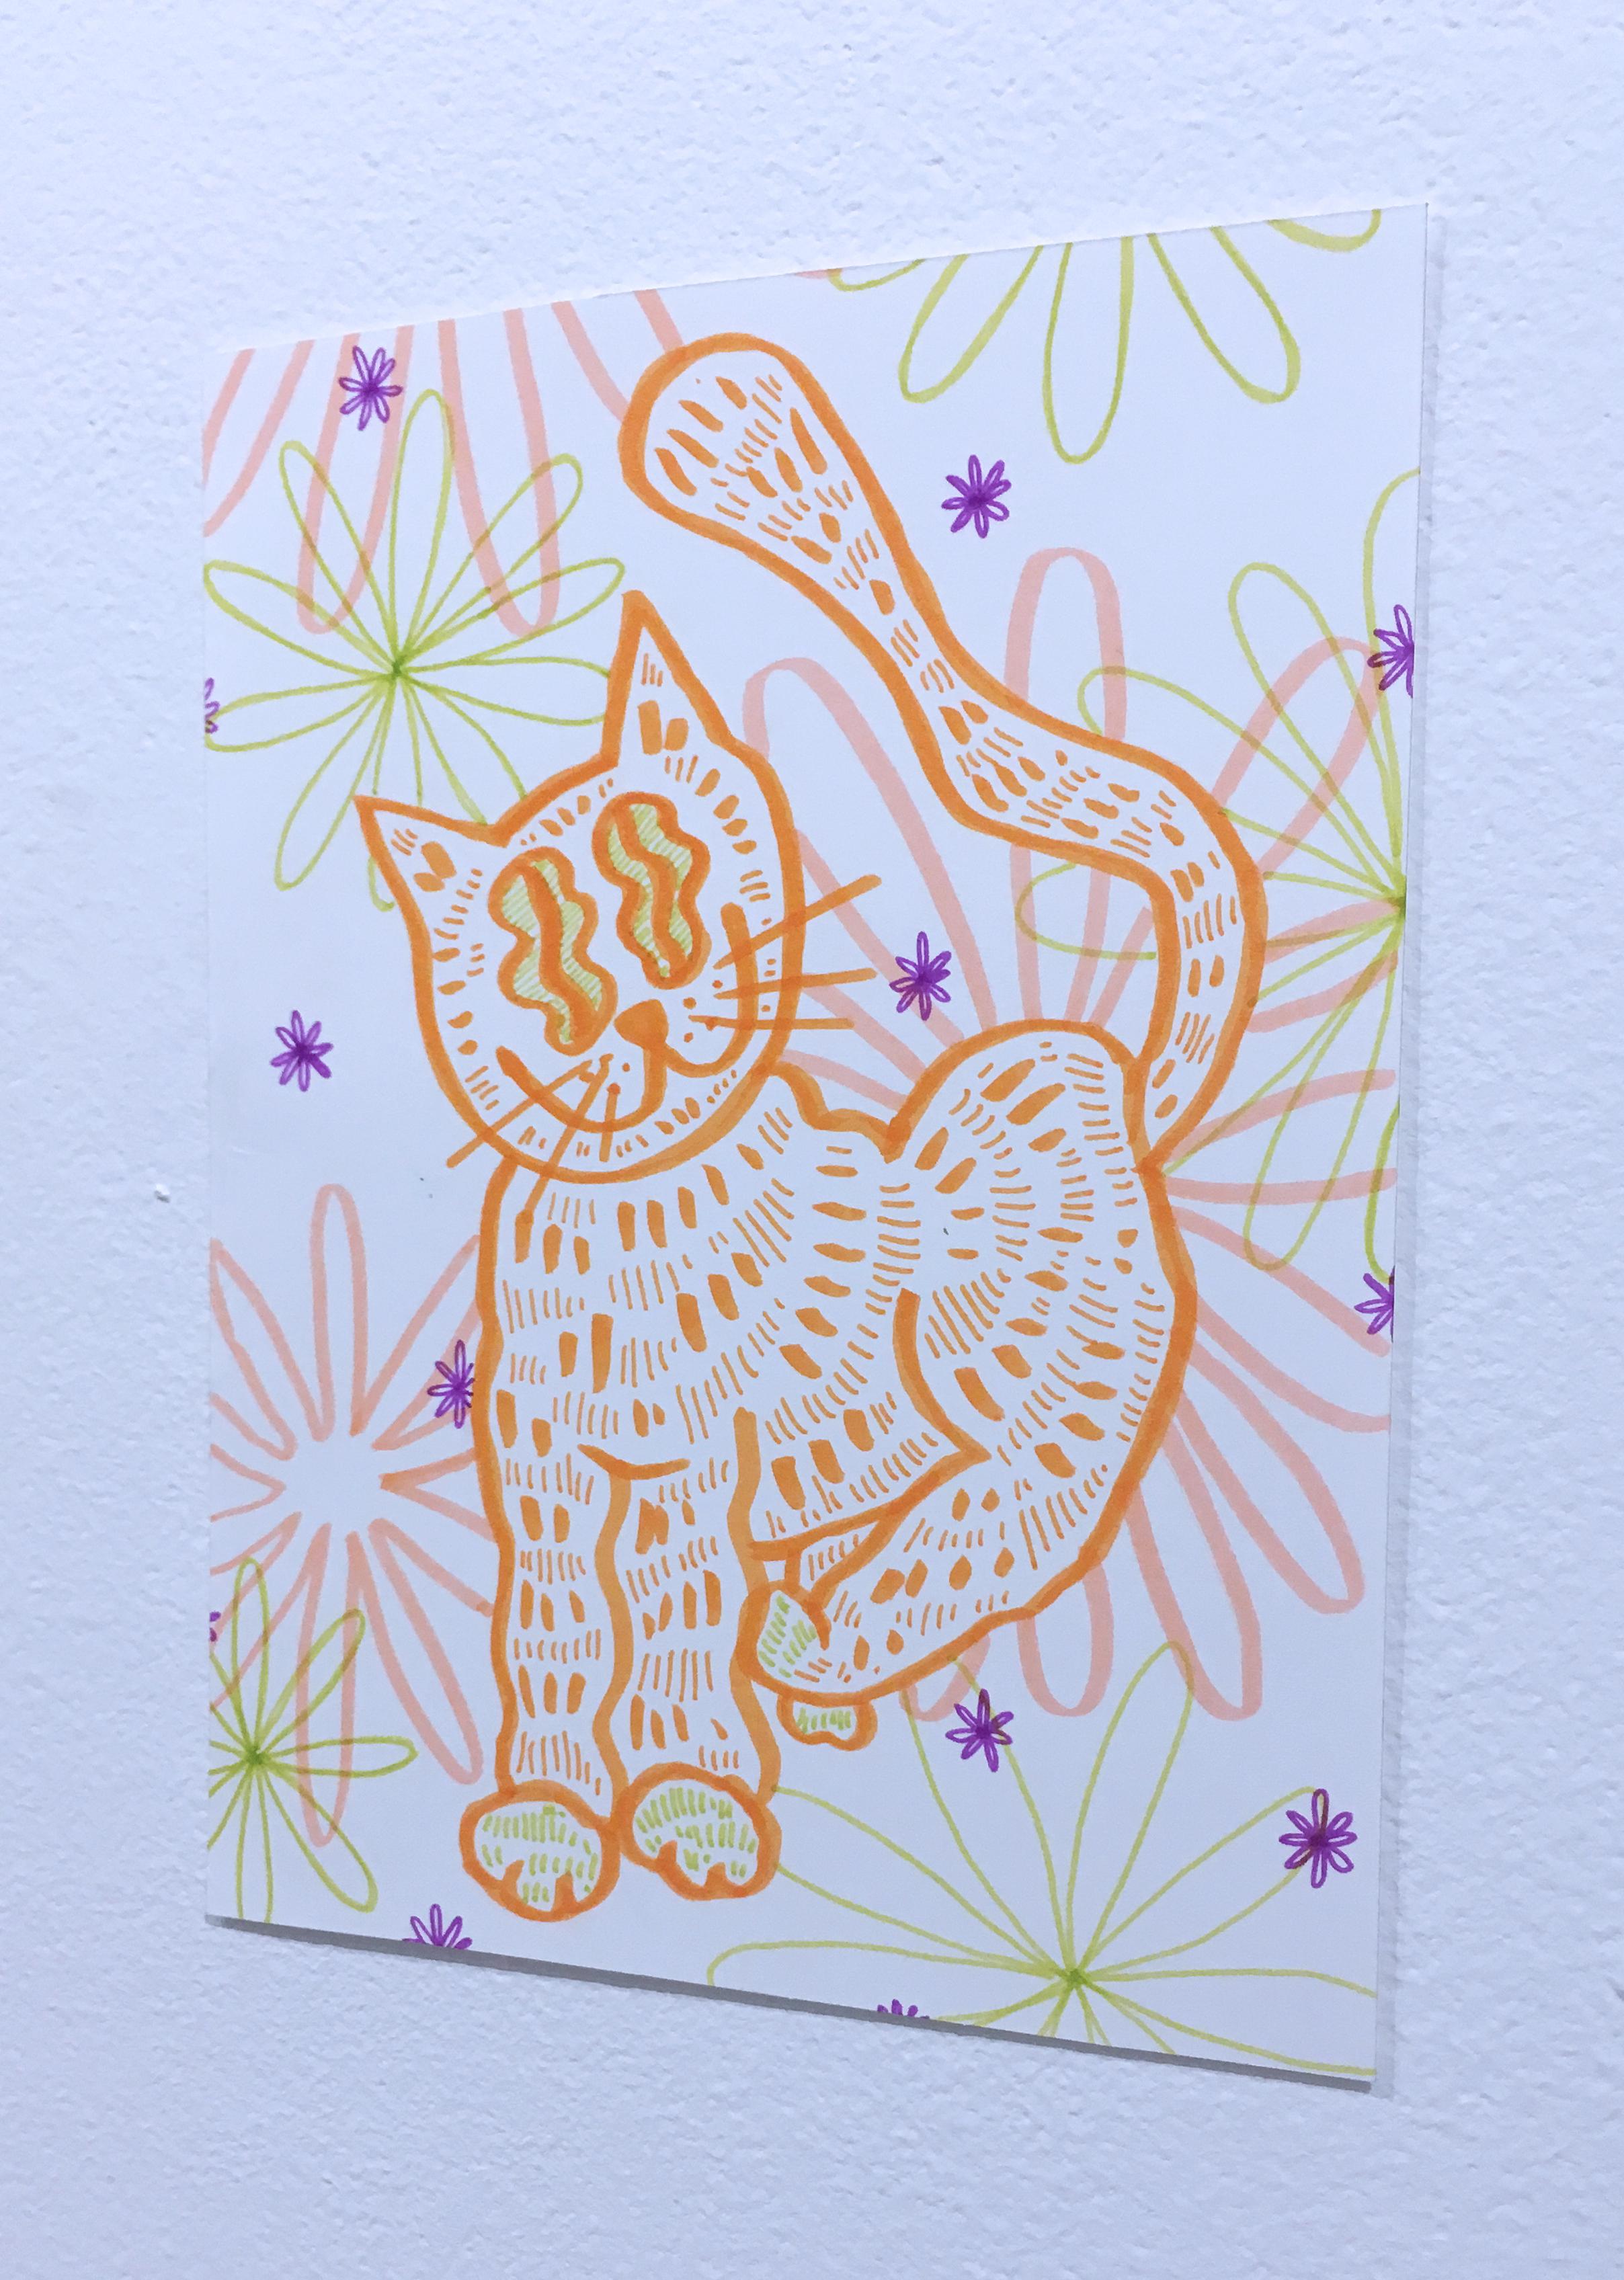 Soft and Fuzzy, Watercolor Paper Drawing, Cat with Flowers, Graphic Wavy Pattern - Contemporary Art by SarahGrace